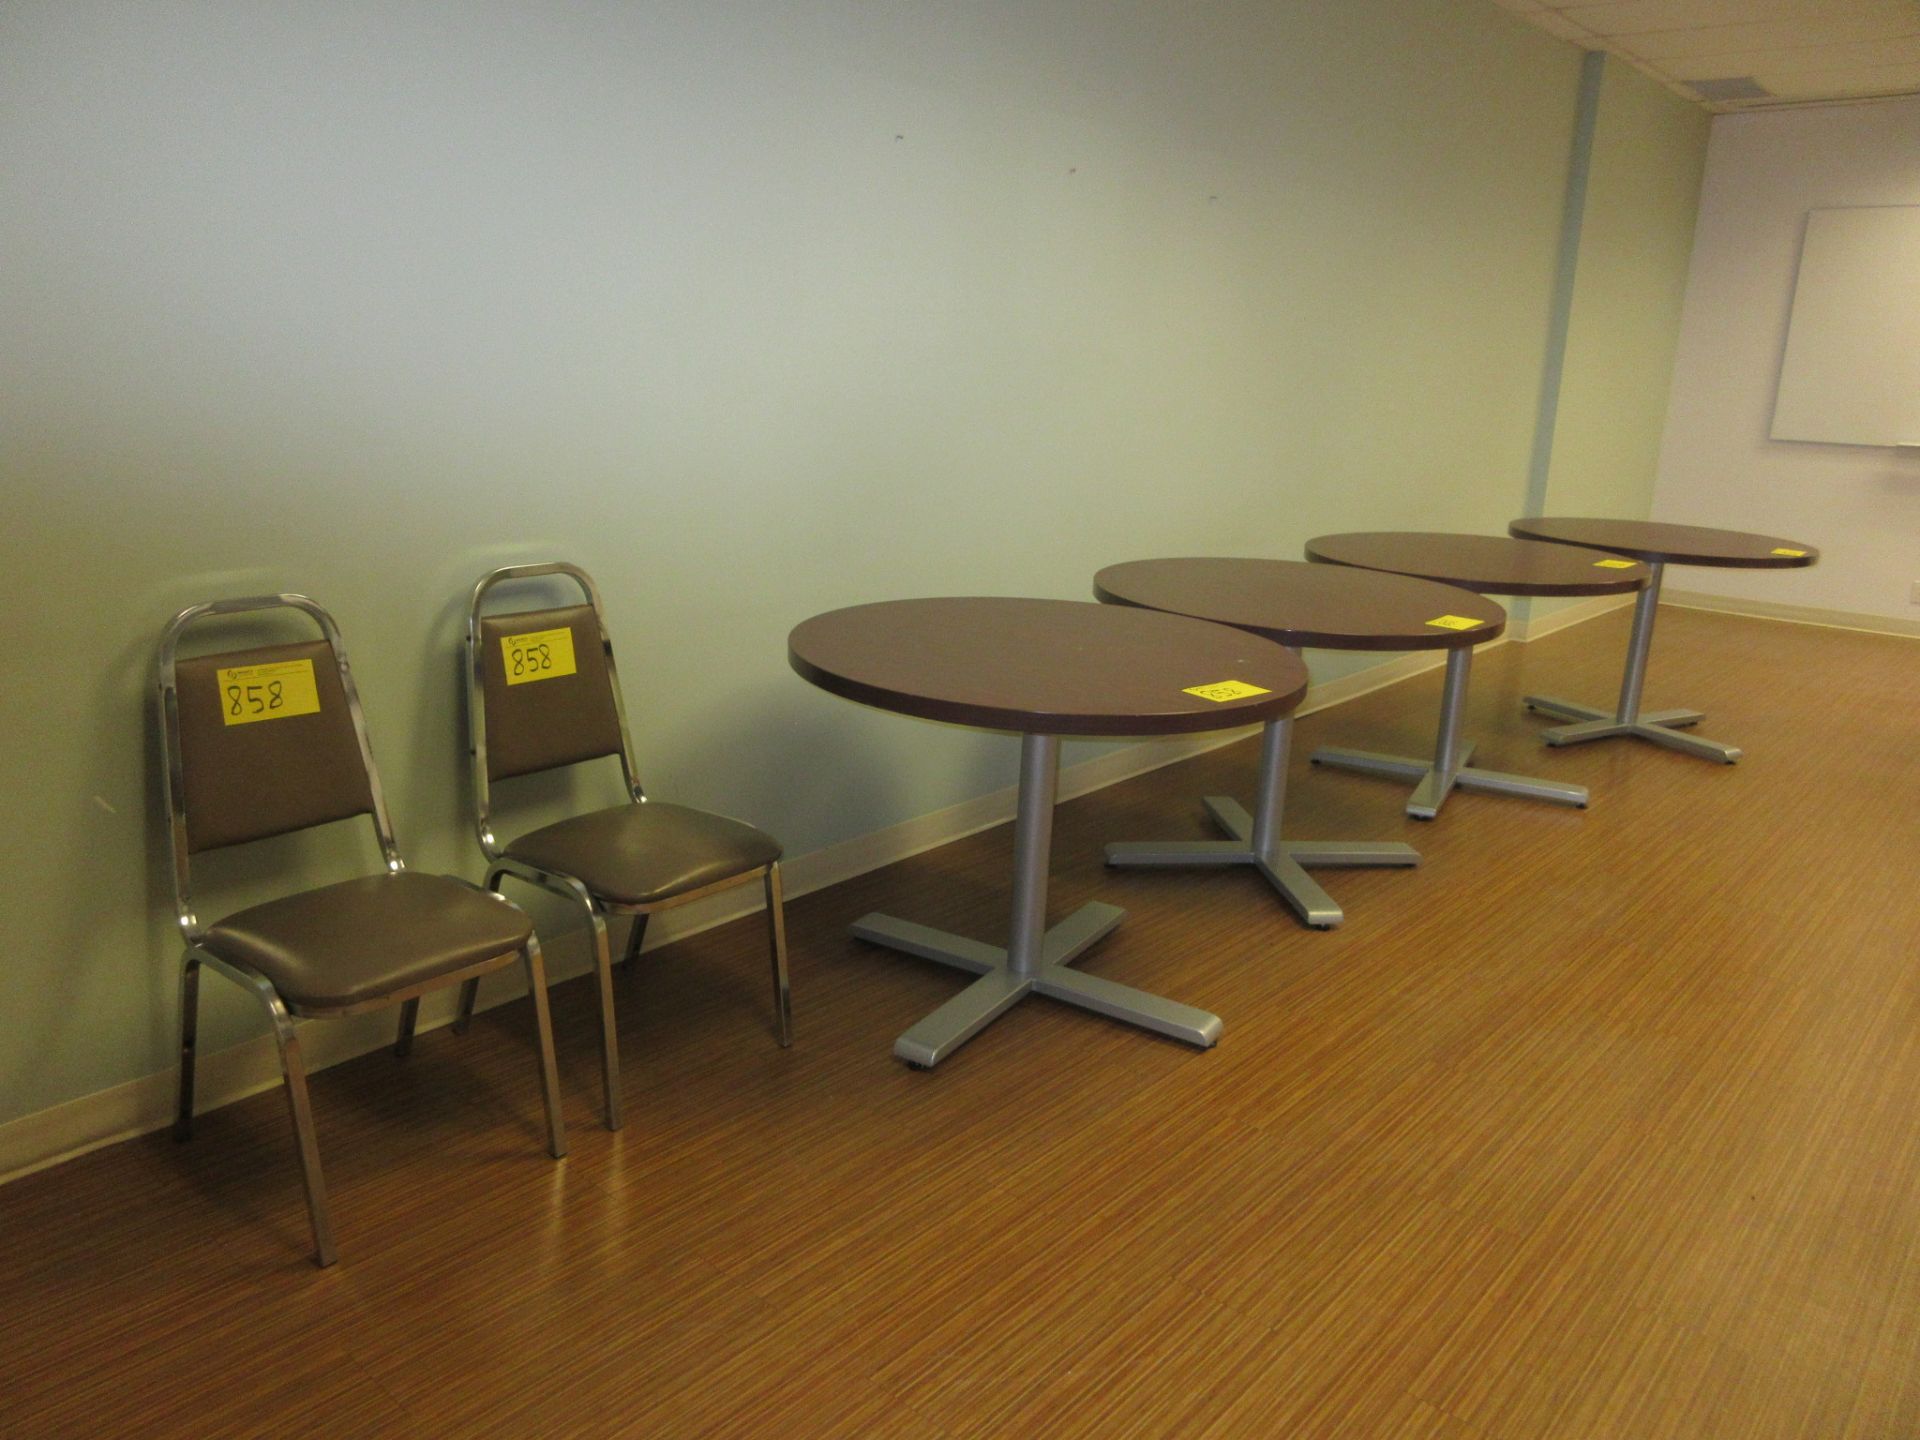 LOT OF (4) ROUND LUNCH TABLES AND (2) CHAIRS (FRONT OFFICES) (SUBJECT TO BULK BID LOT 851A)